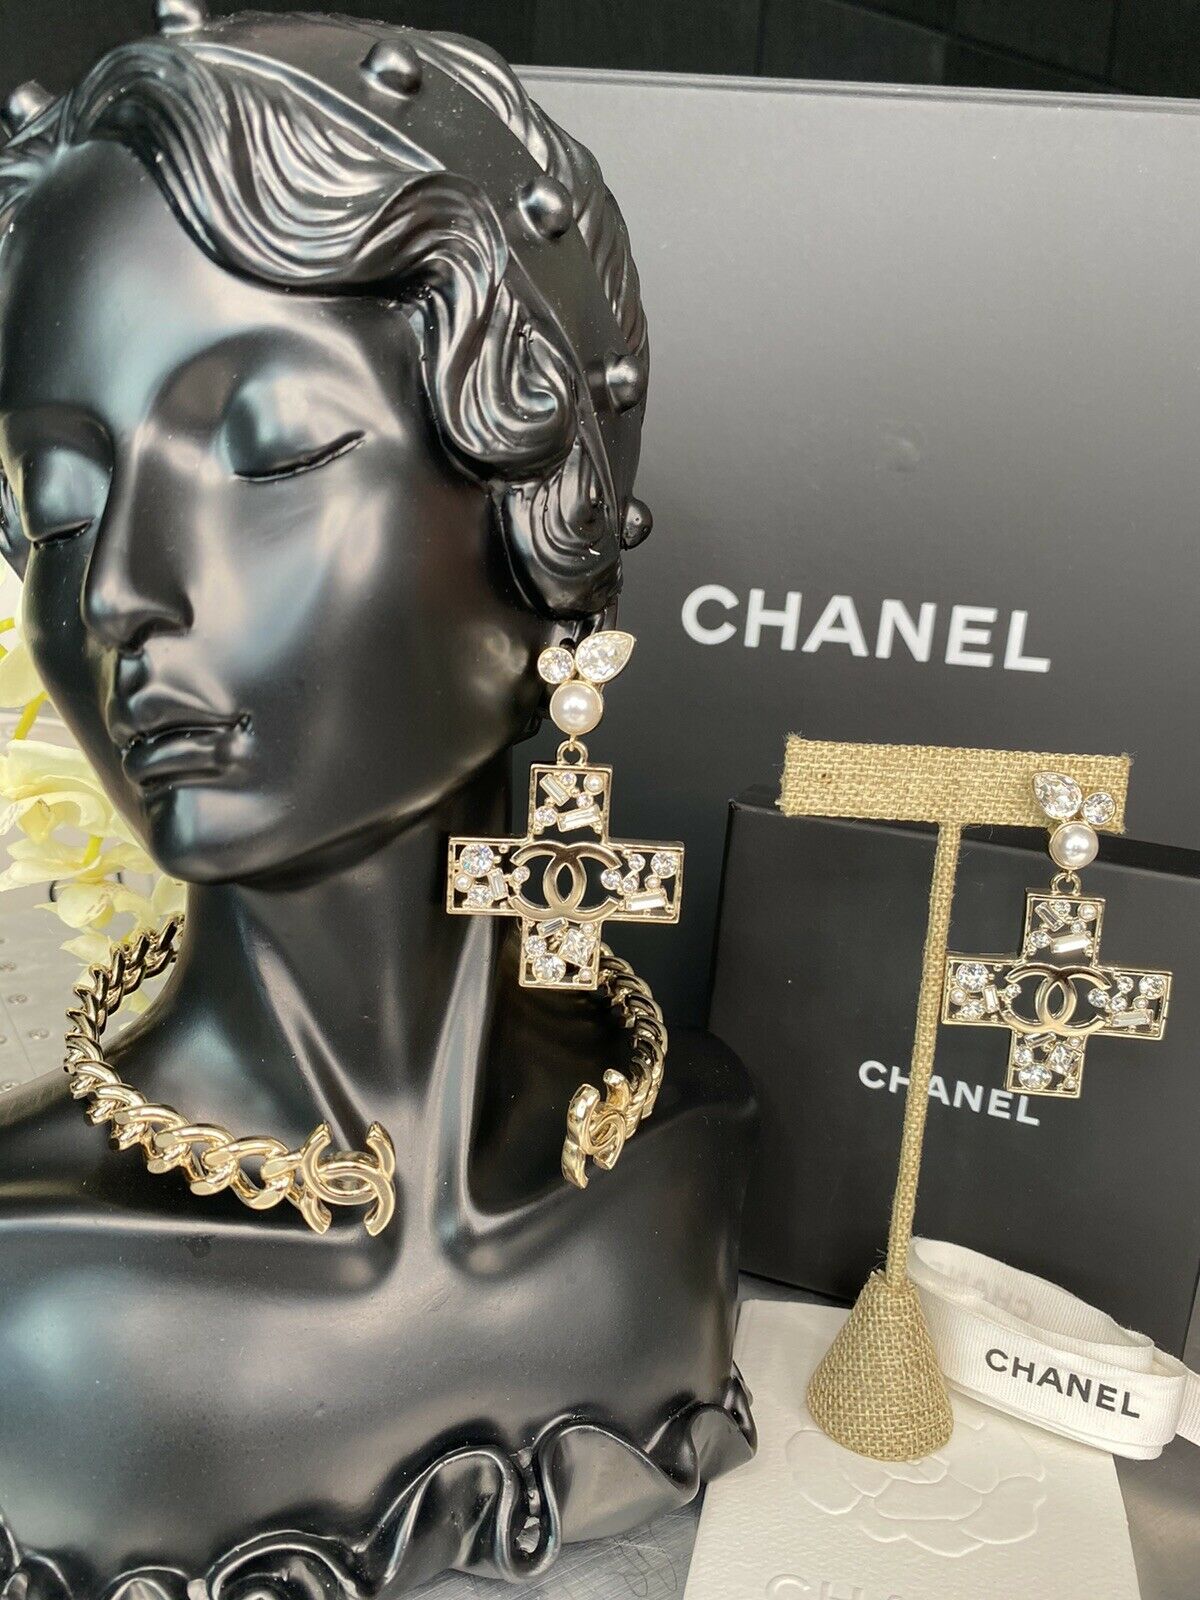 How to Authenticate Chanel Jewellery